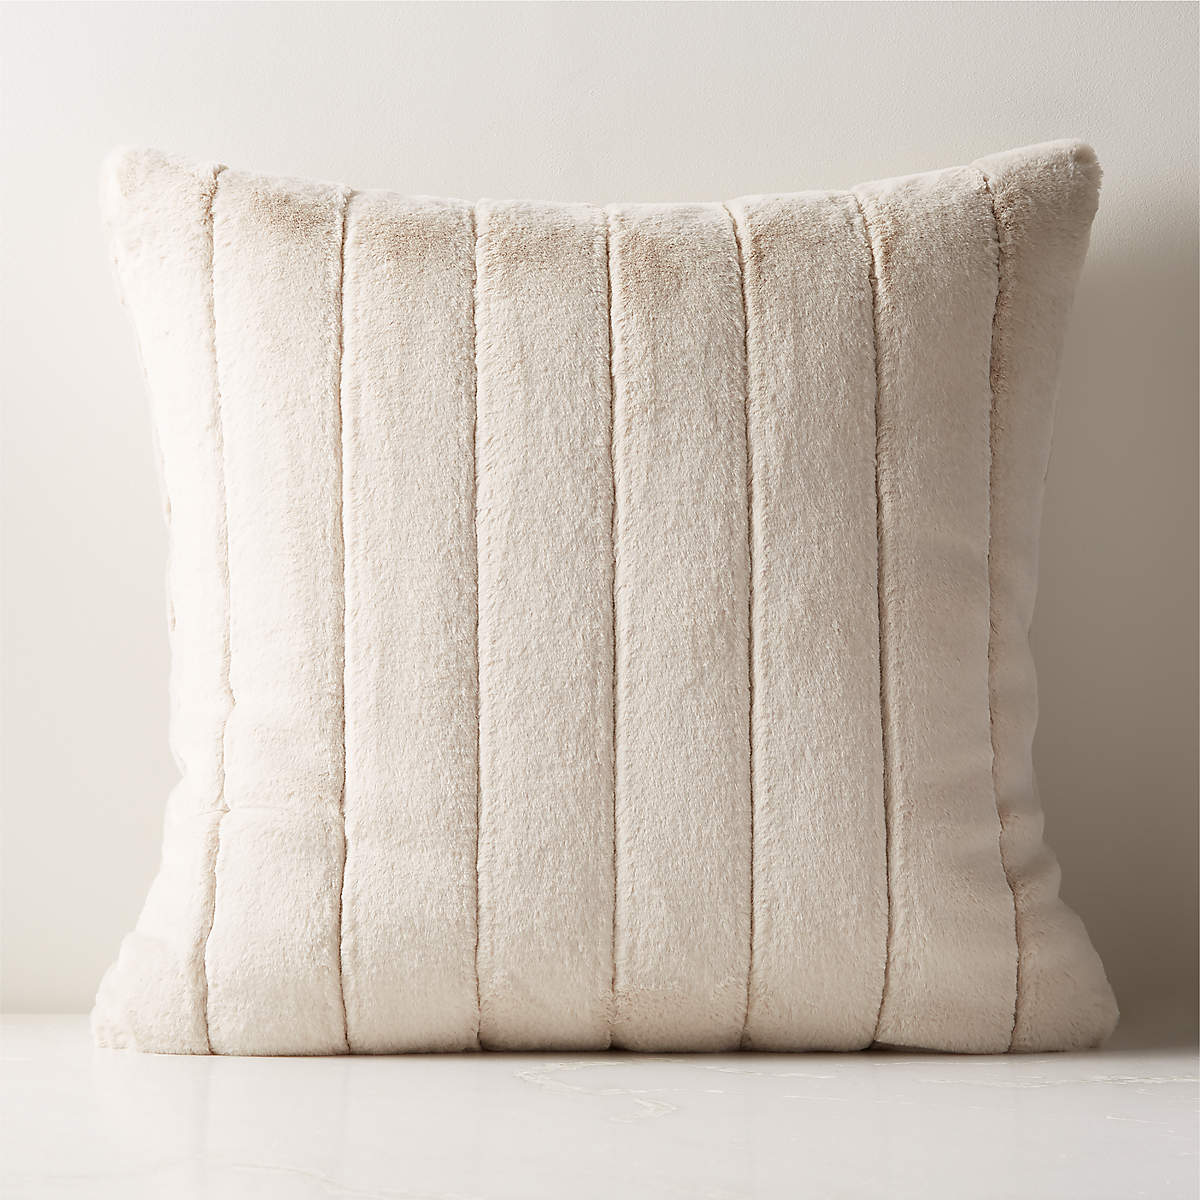 CB2 - Channel Off-White Faux Fur Throw Pillow 23" (Feather Down Insert) - Decorative Pillow